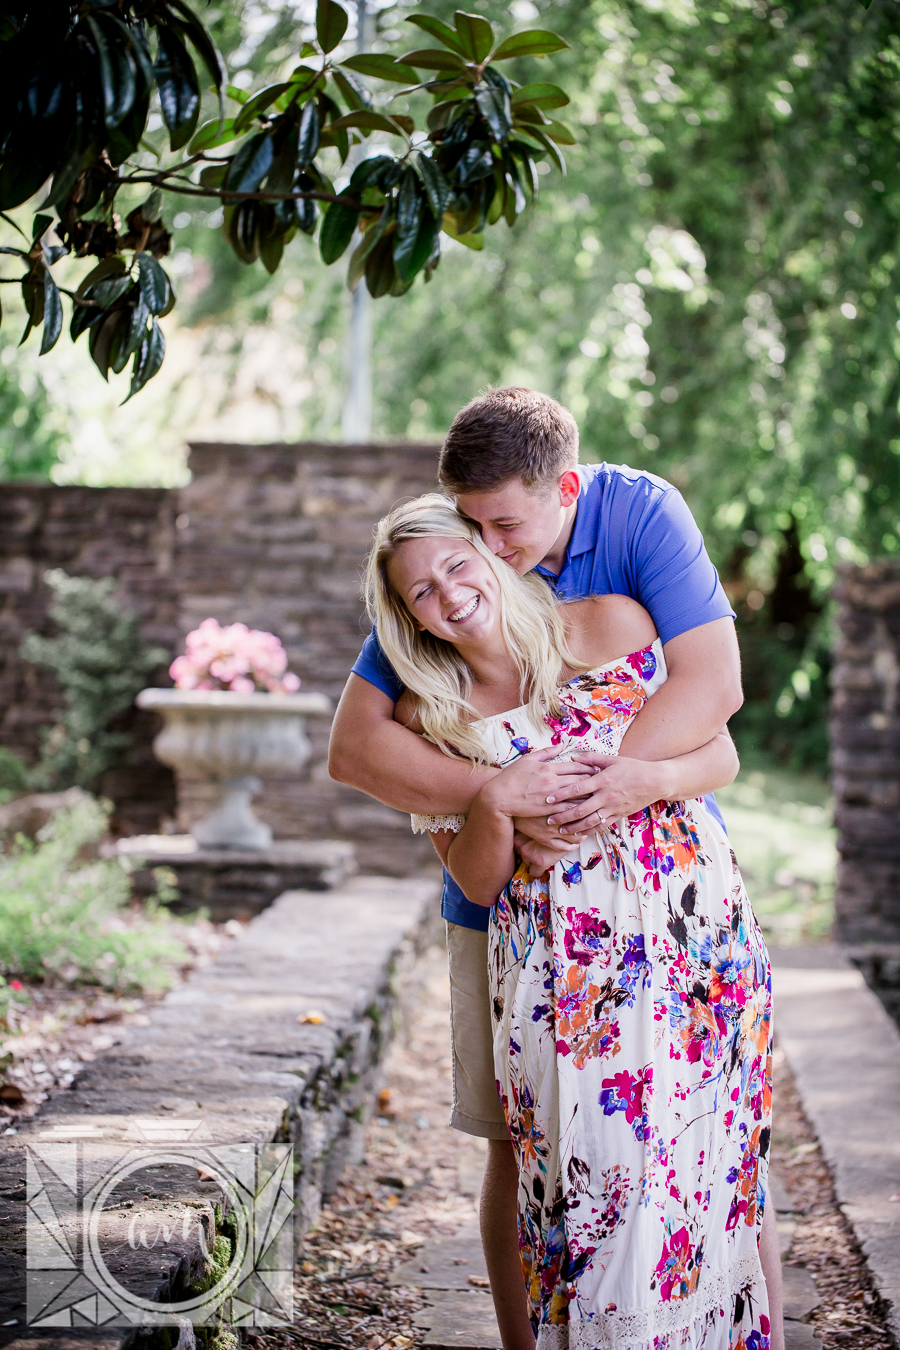 Hugging her from behind leaning engagement photo by Knoxville Wedding Photographer, Amanda May Photos.